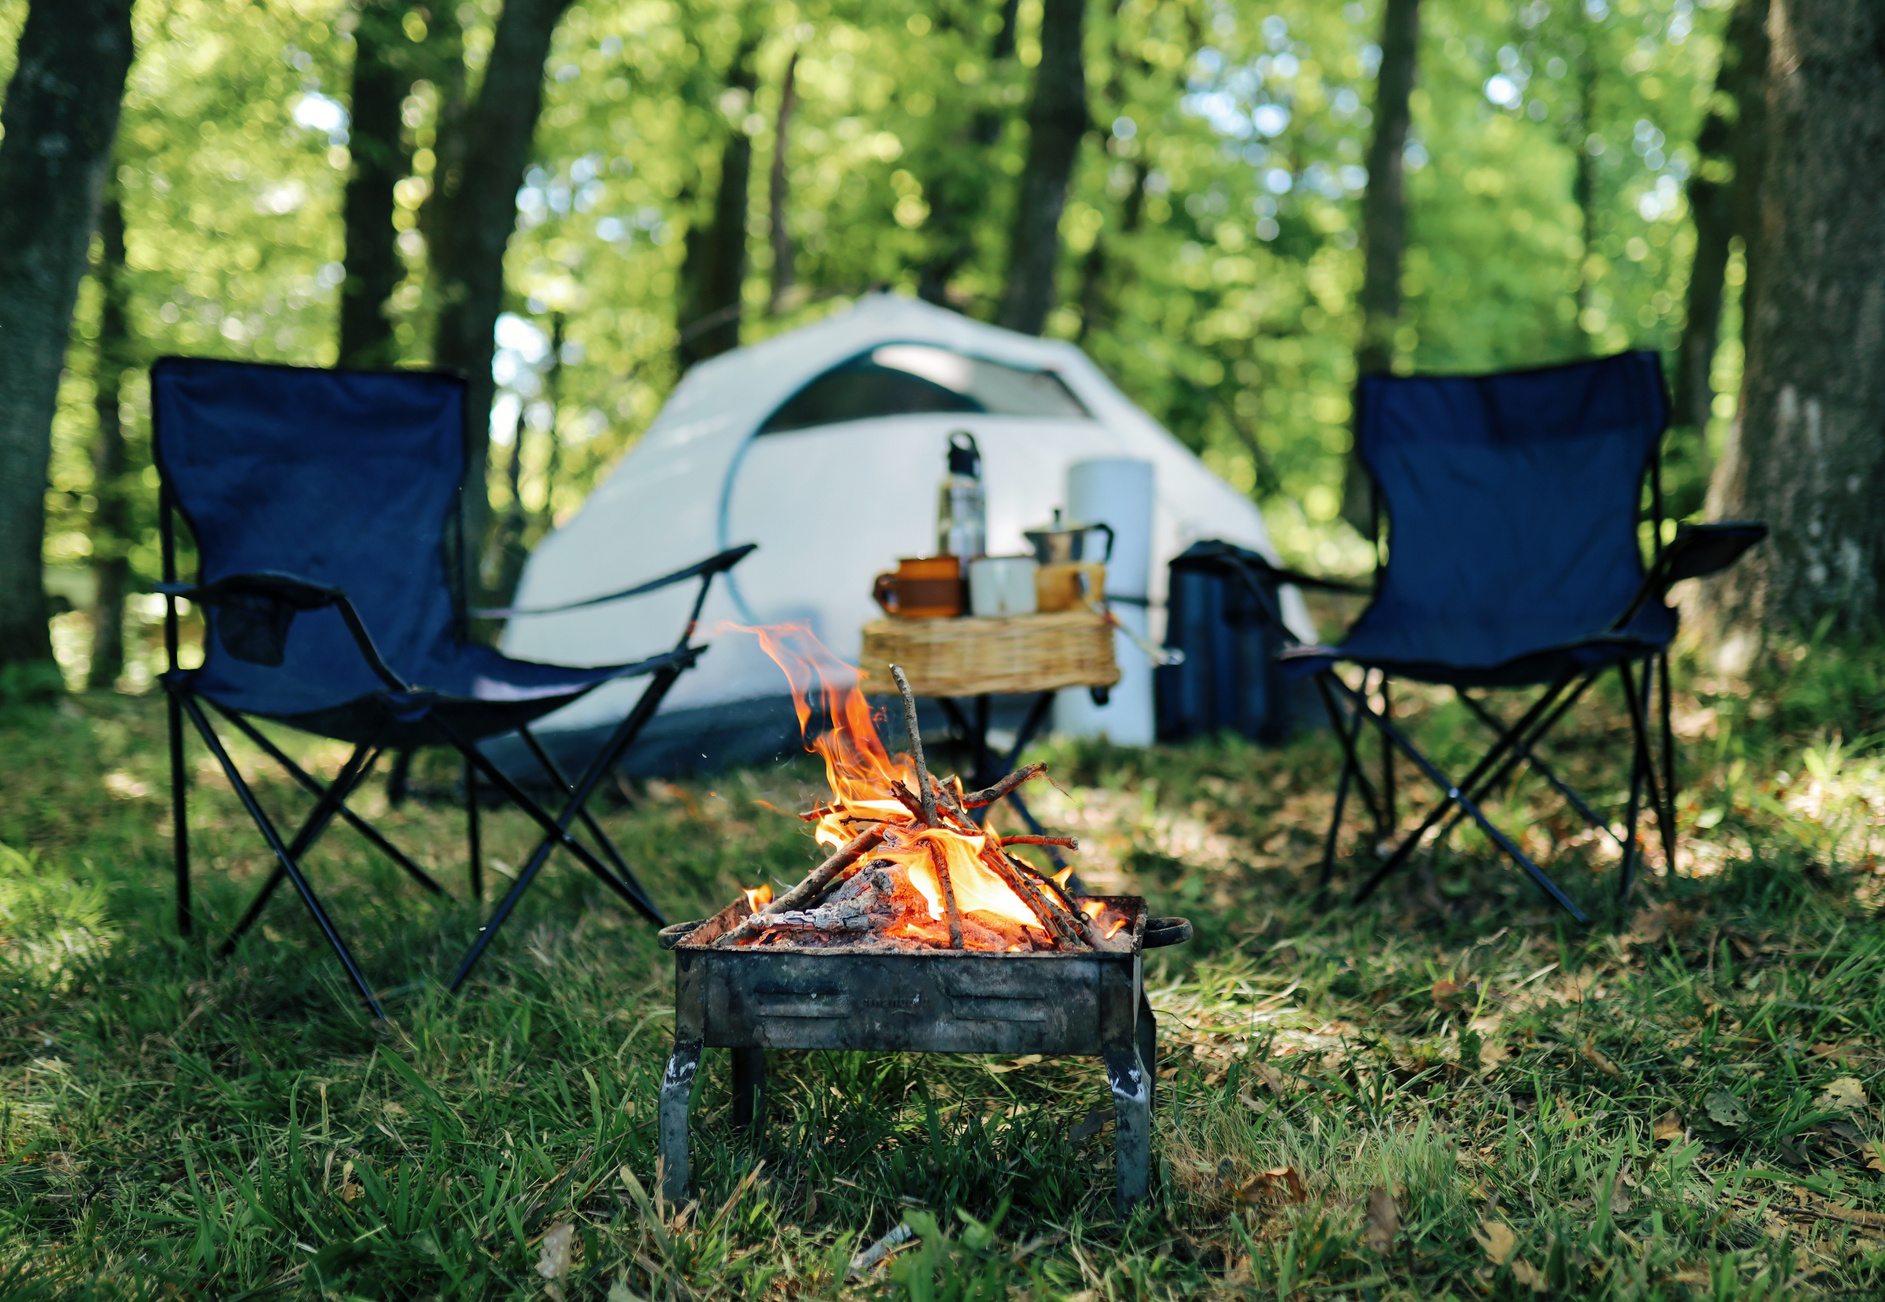 Tent, Chairs, and Burning Campfire Outdoors